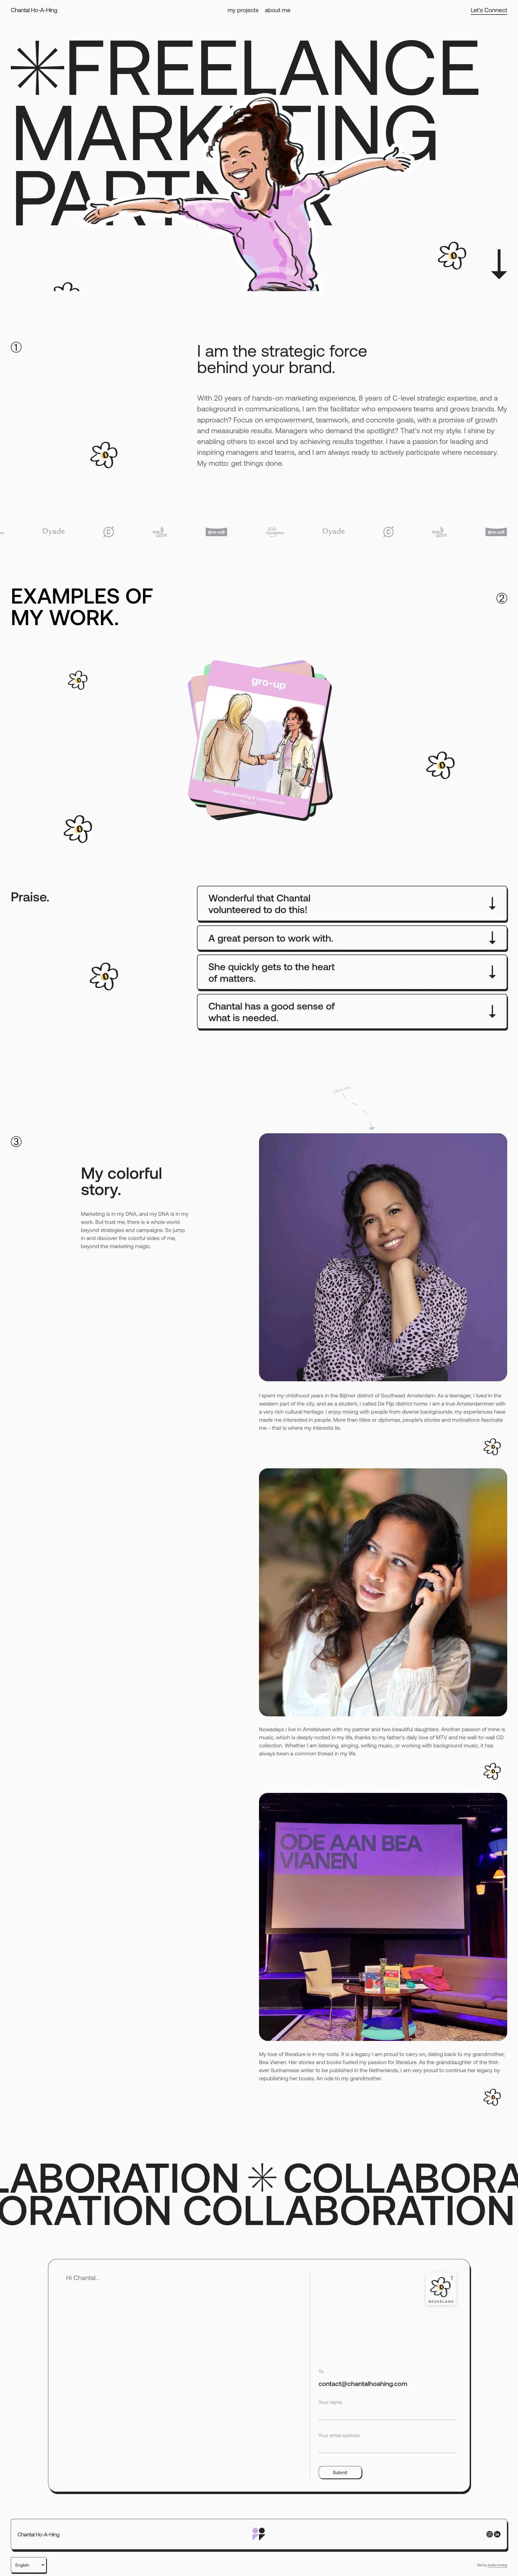 Chantal Ho-A-Hing Landing Page Example: Freelance marketing specialist. Marketing is in my DNA, and my DNA is in my work. But trust me, there is a whole world beyond strategies and campaigns. So jump in and discover the colorful sides of me, beyond the marketing magic.